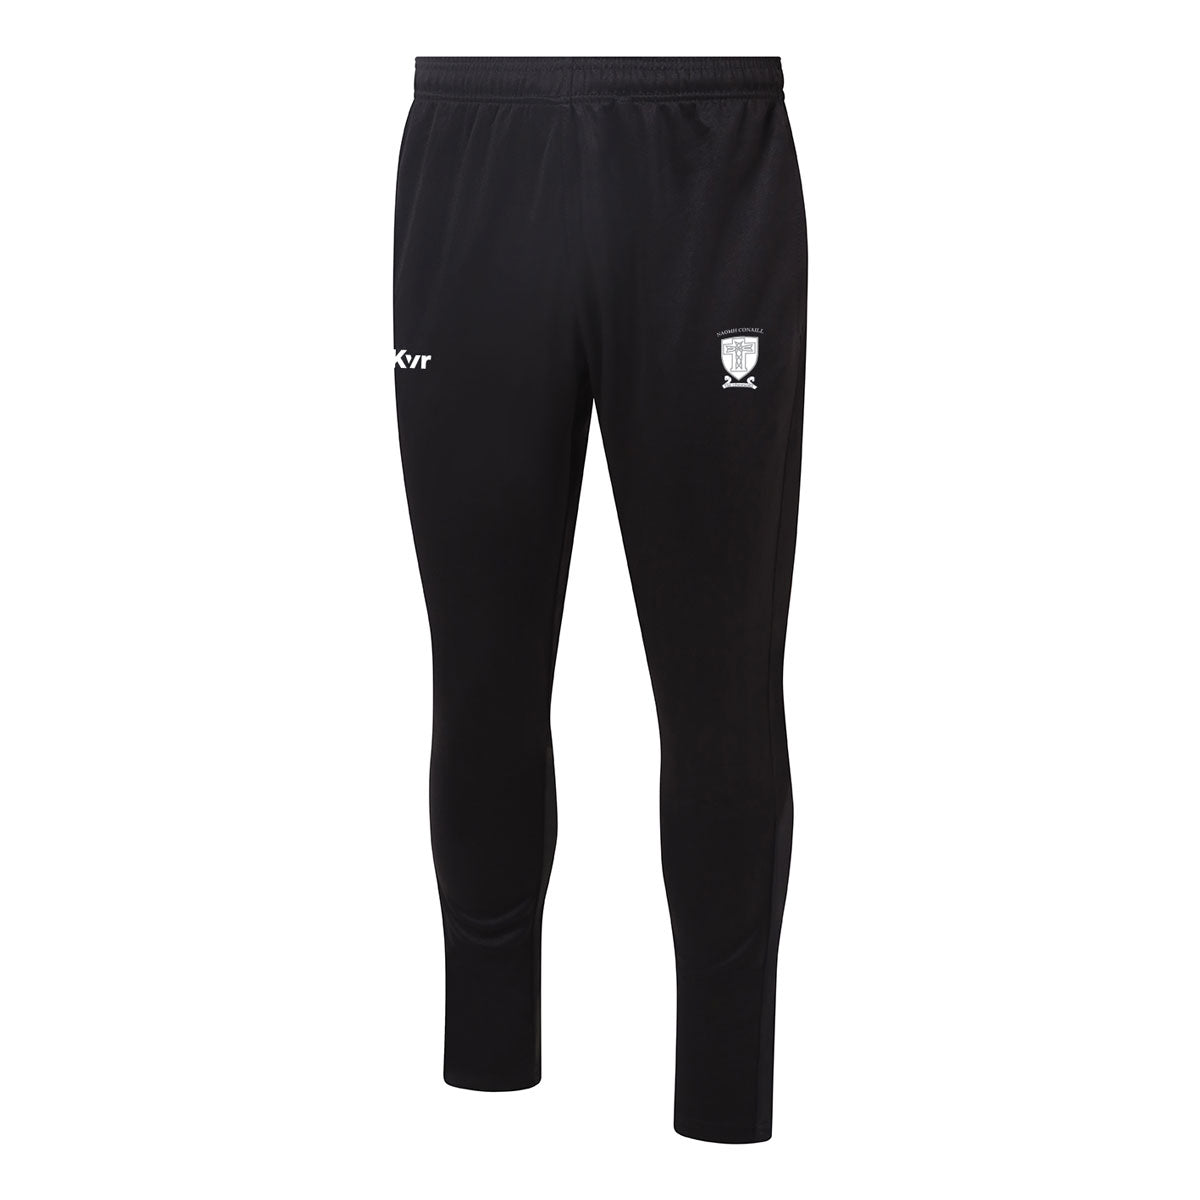 Mc Keever Naomh Conaill Donegal Core 22 Skinny Pants - Adult - Black